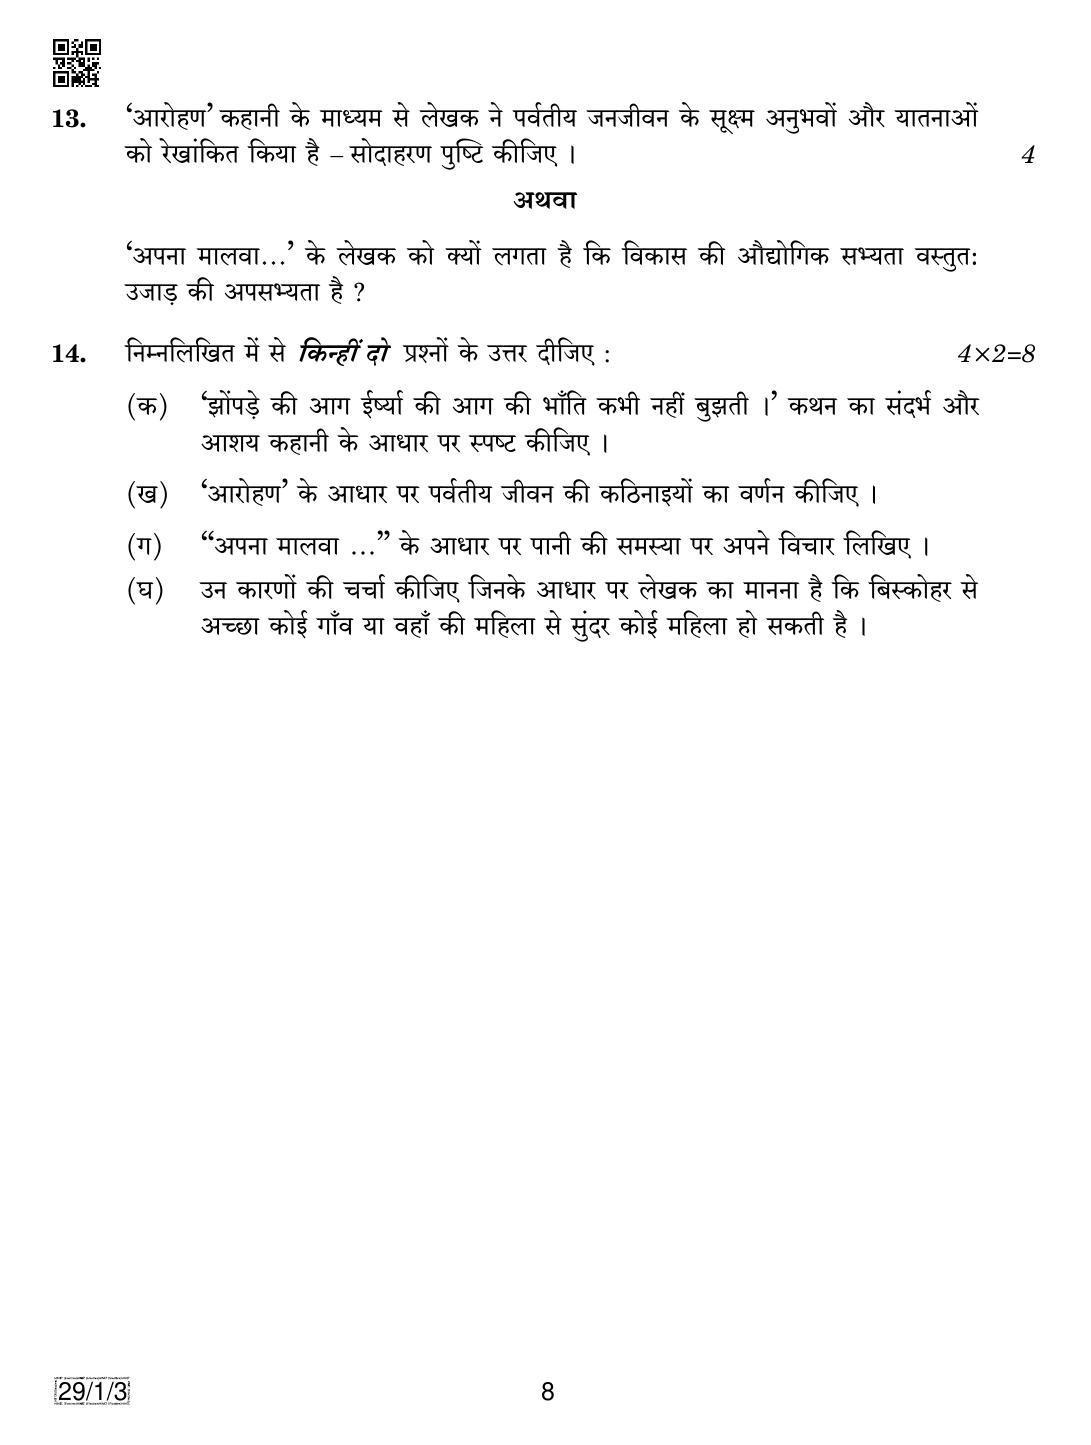 CBSE Class 12 29-1-3 HINDI ELECTIVE 2019 Compartment Question Paper - Page 8